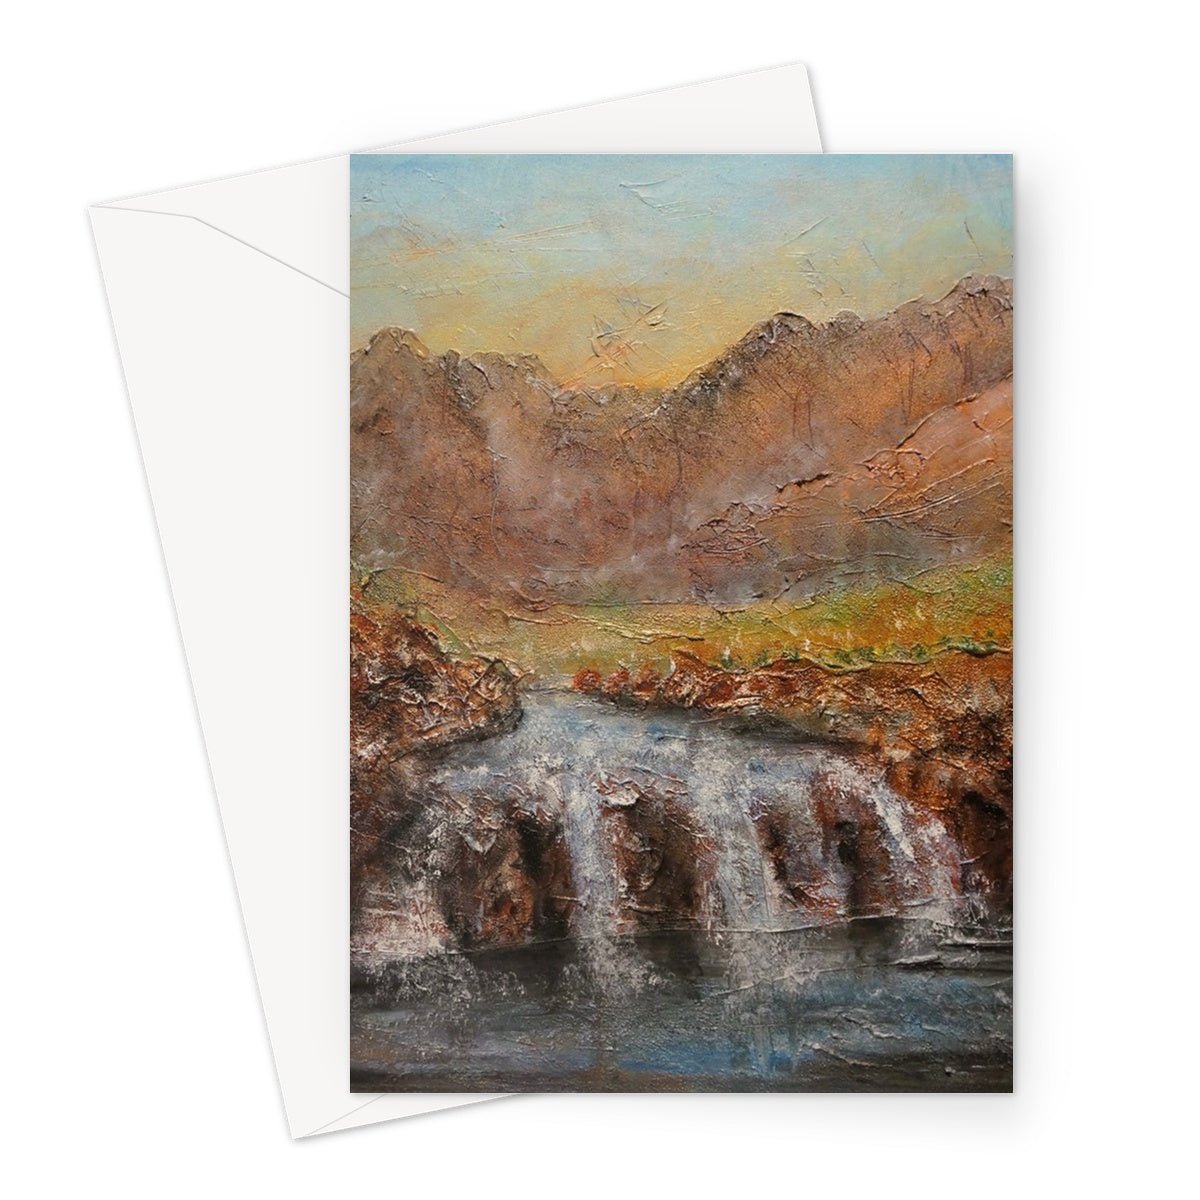 Fairy Pools Dawn Skye Art Gifts Greeting Card-Greetings Cards-Skye Art Gallery-A5 Portrait-1 Card-Paintings, Prints, Homeware, Art Gifts From Scotland By Scottish Artist Kevin Hunter